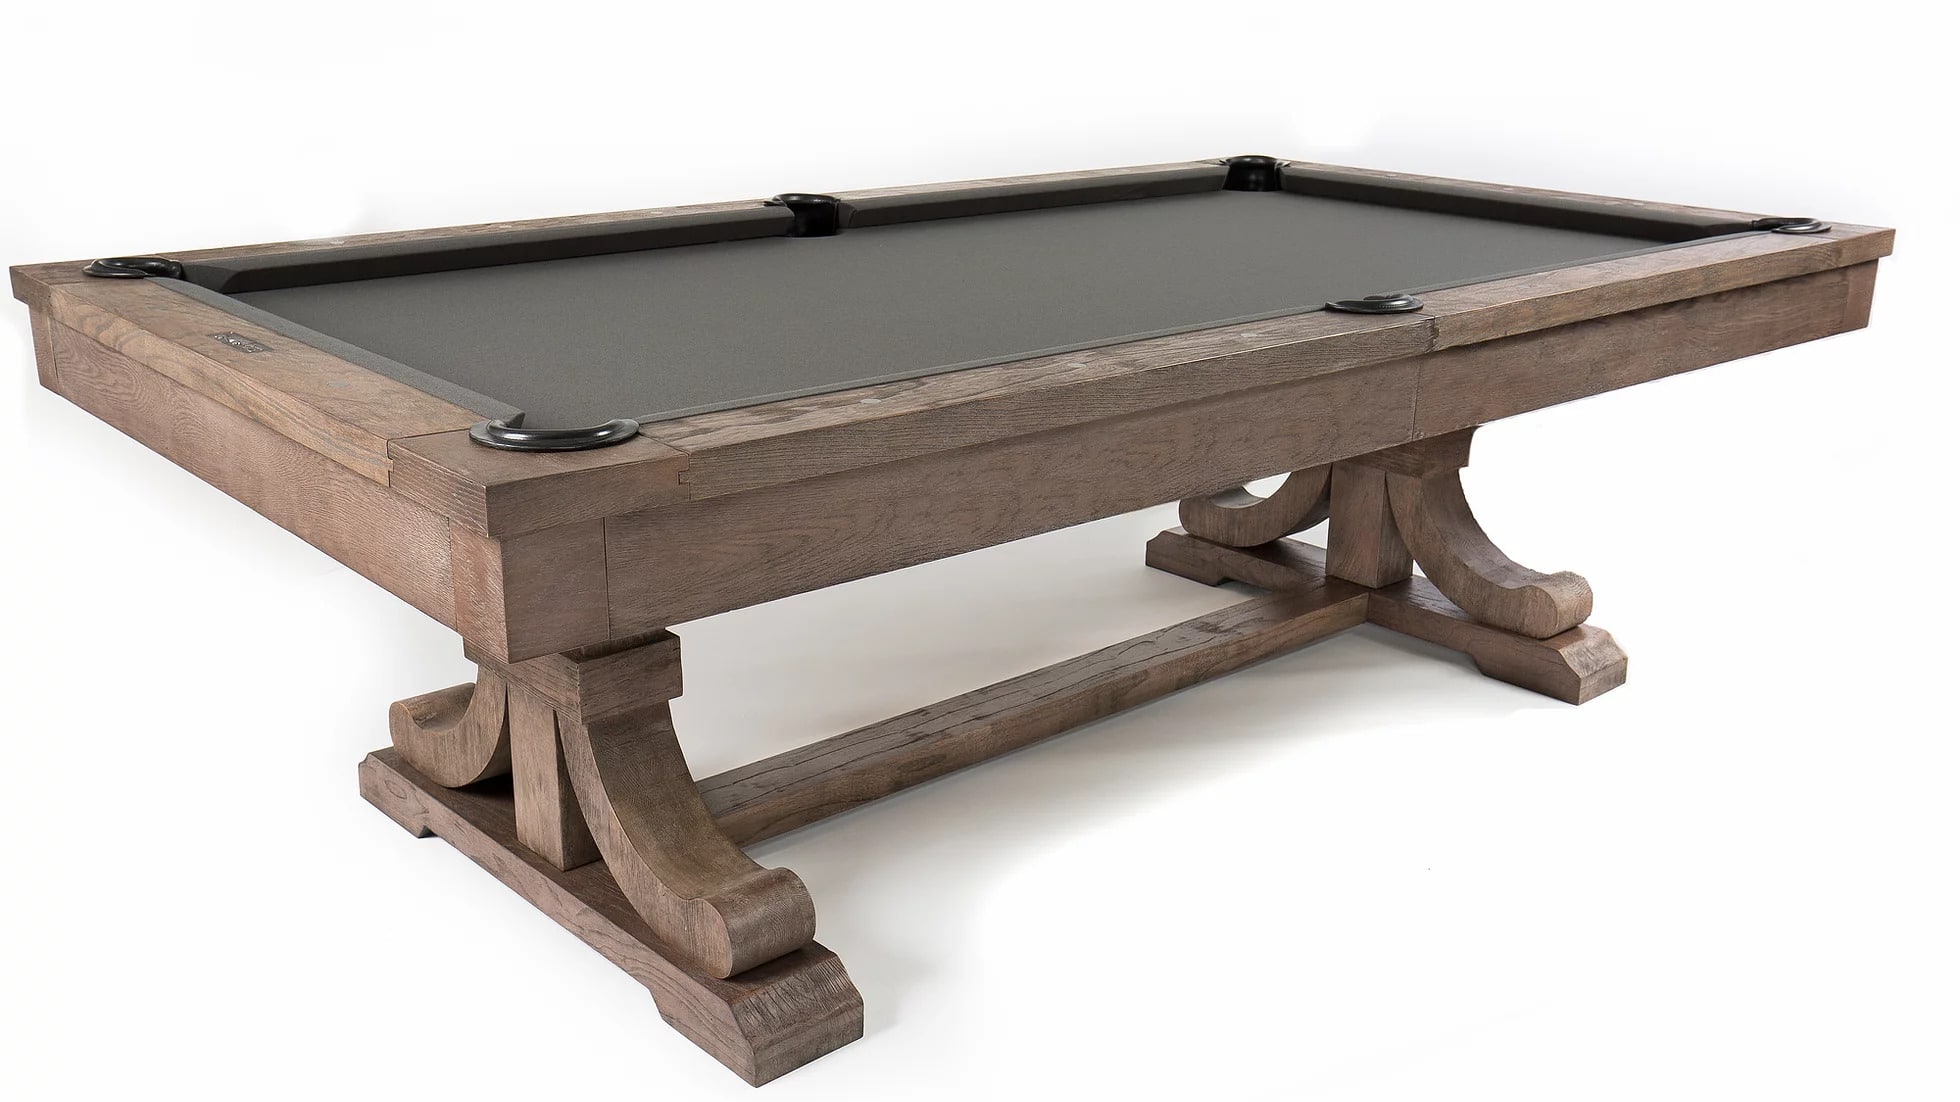 Carmel Pool Table - Man Cave Warehouse Pool Table Superstore